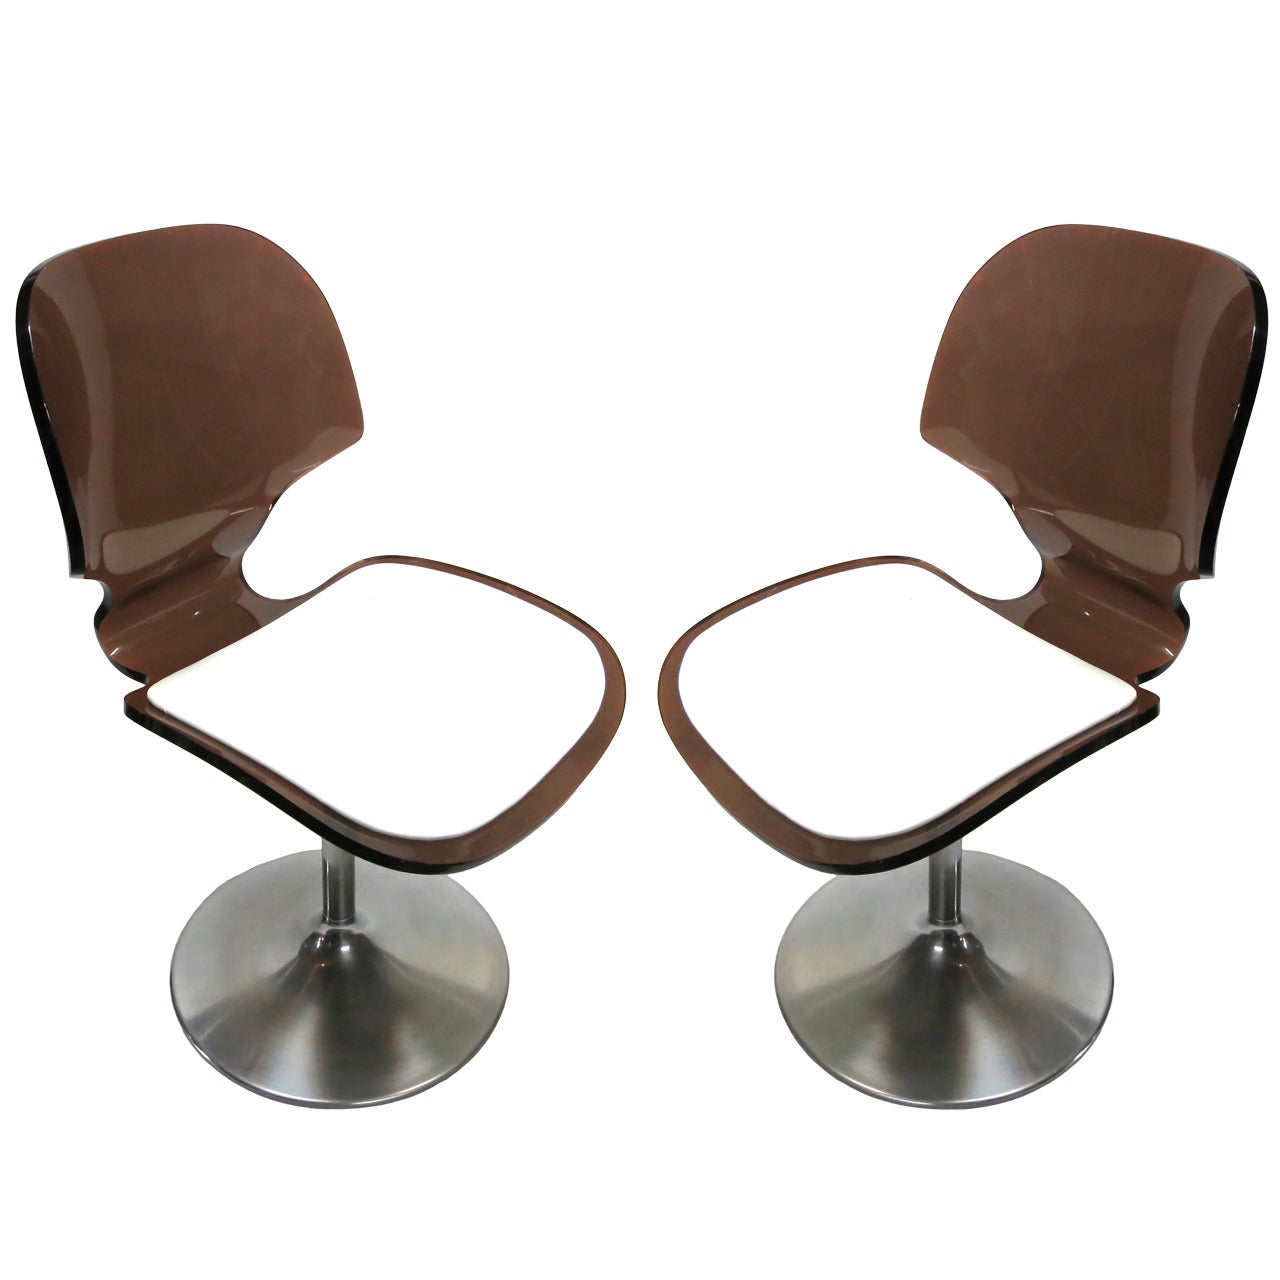 Pair of Swivel Chairs in Smoked Lucite, circa 1970